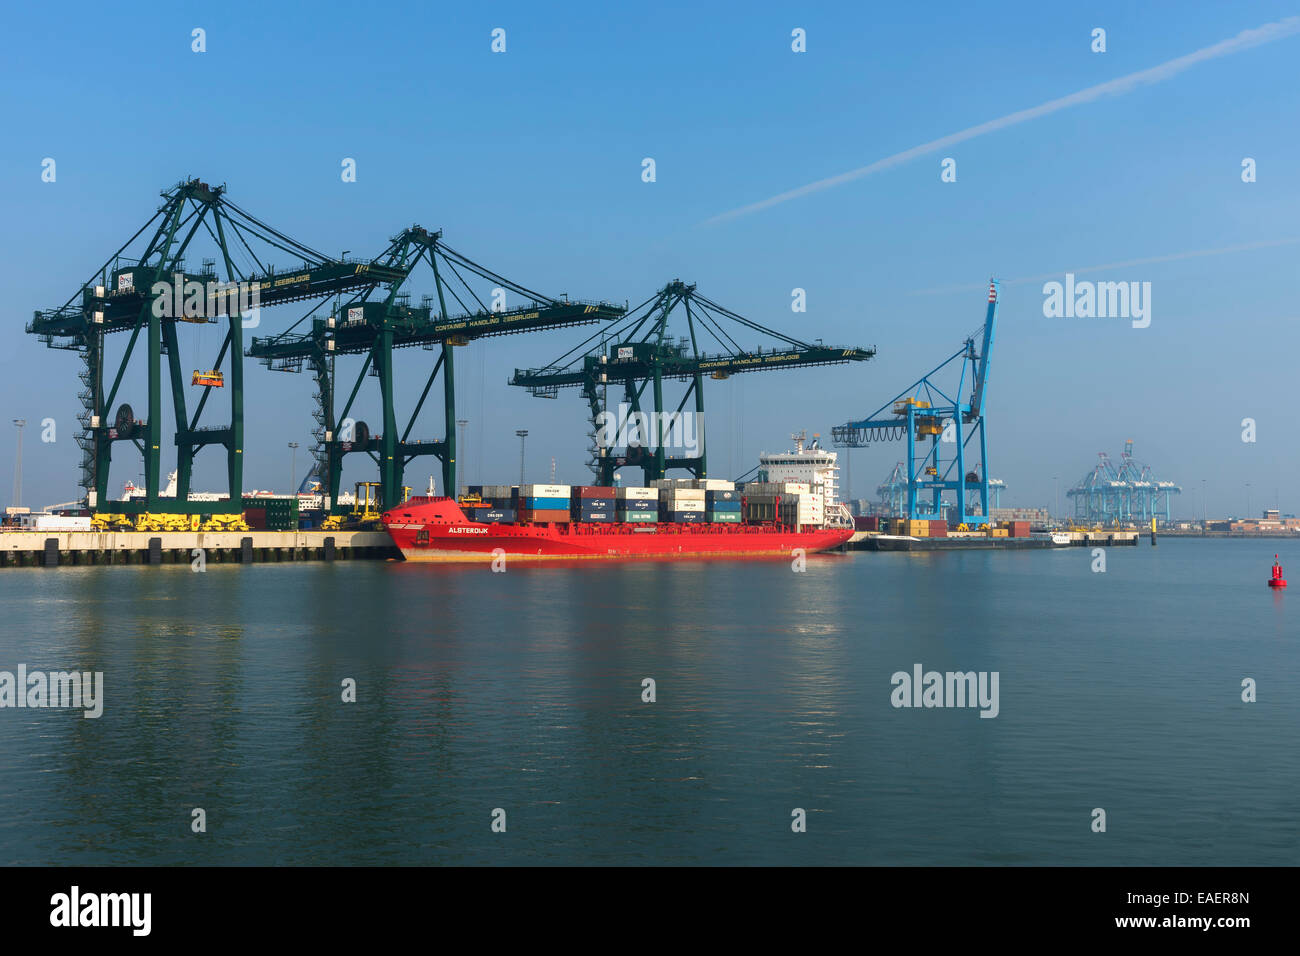 Container ship in the harbor of Zeebrugge-Seabruges. Stock Photo